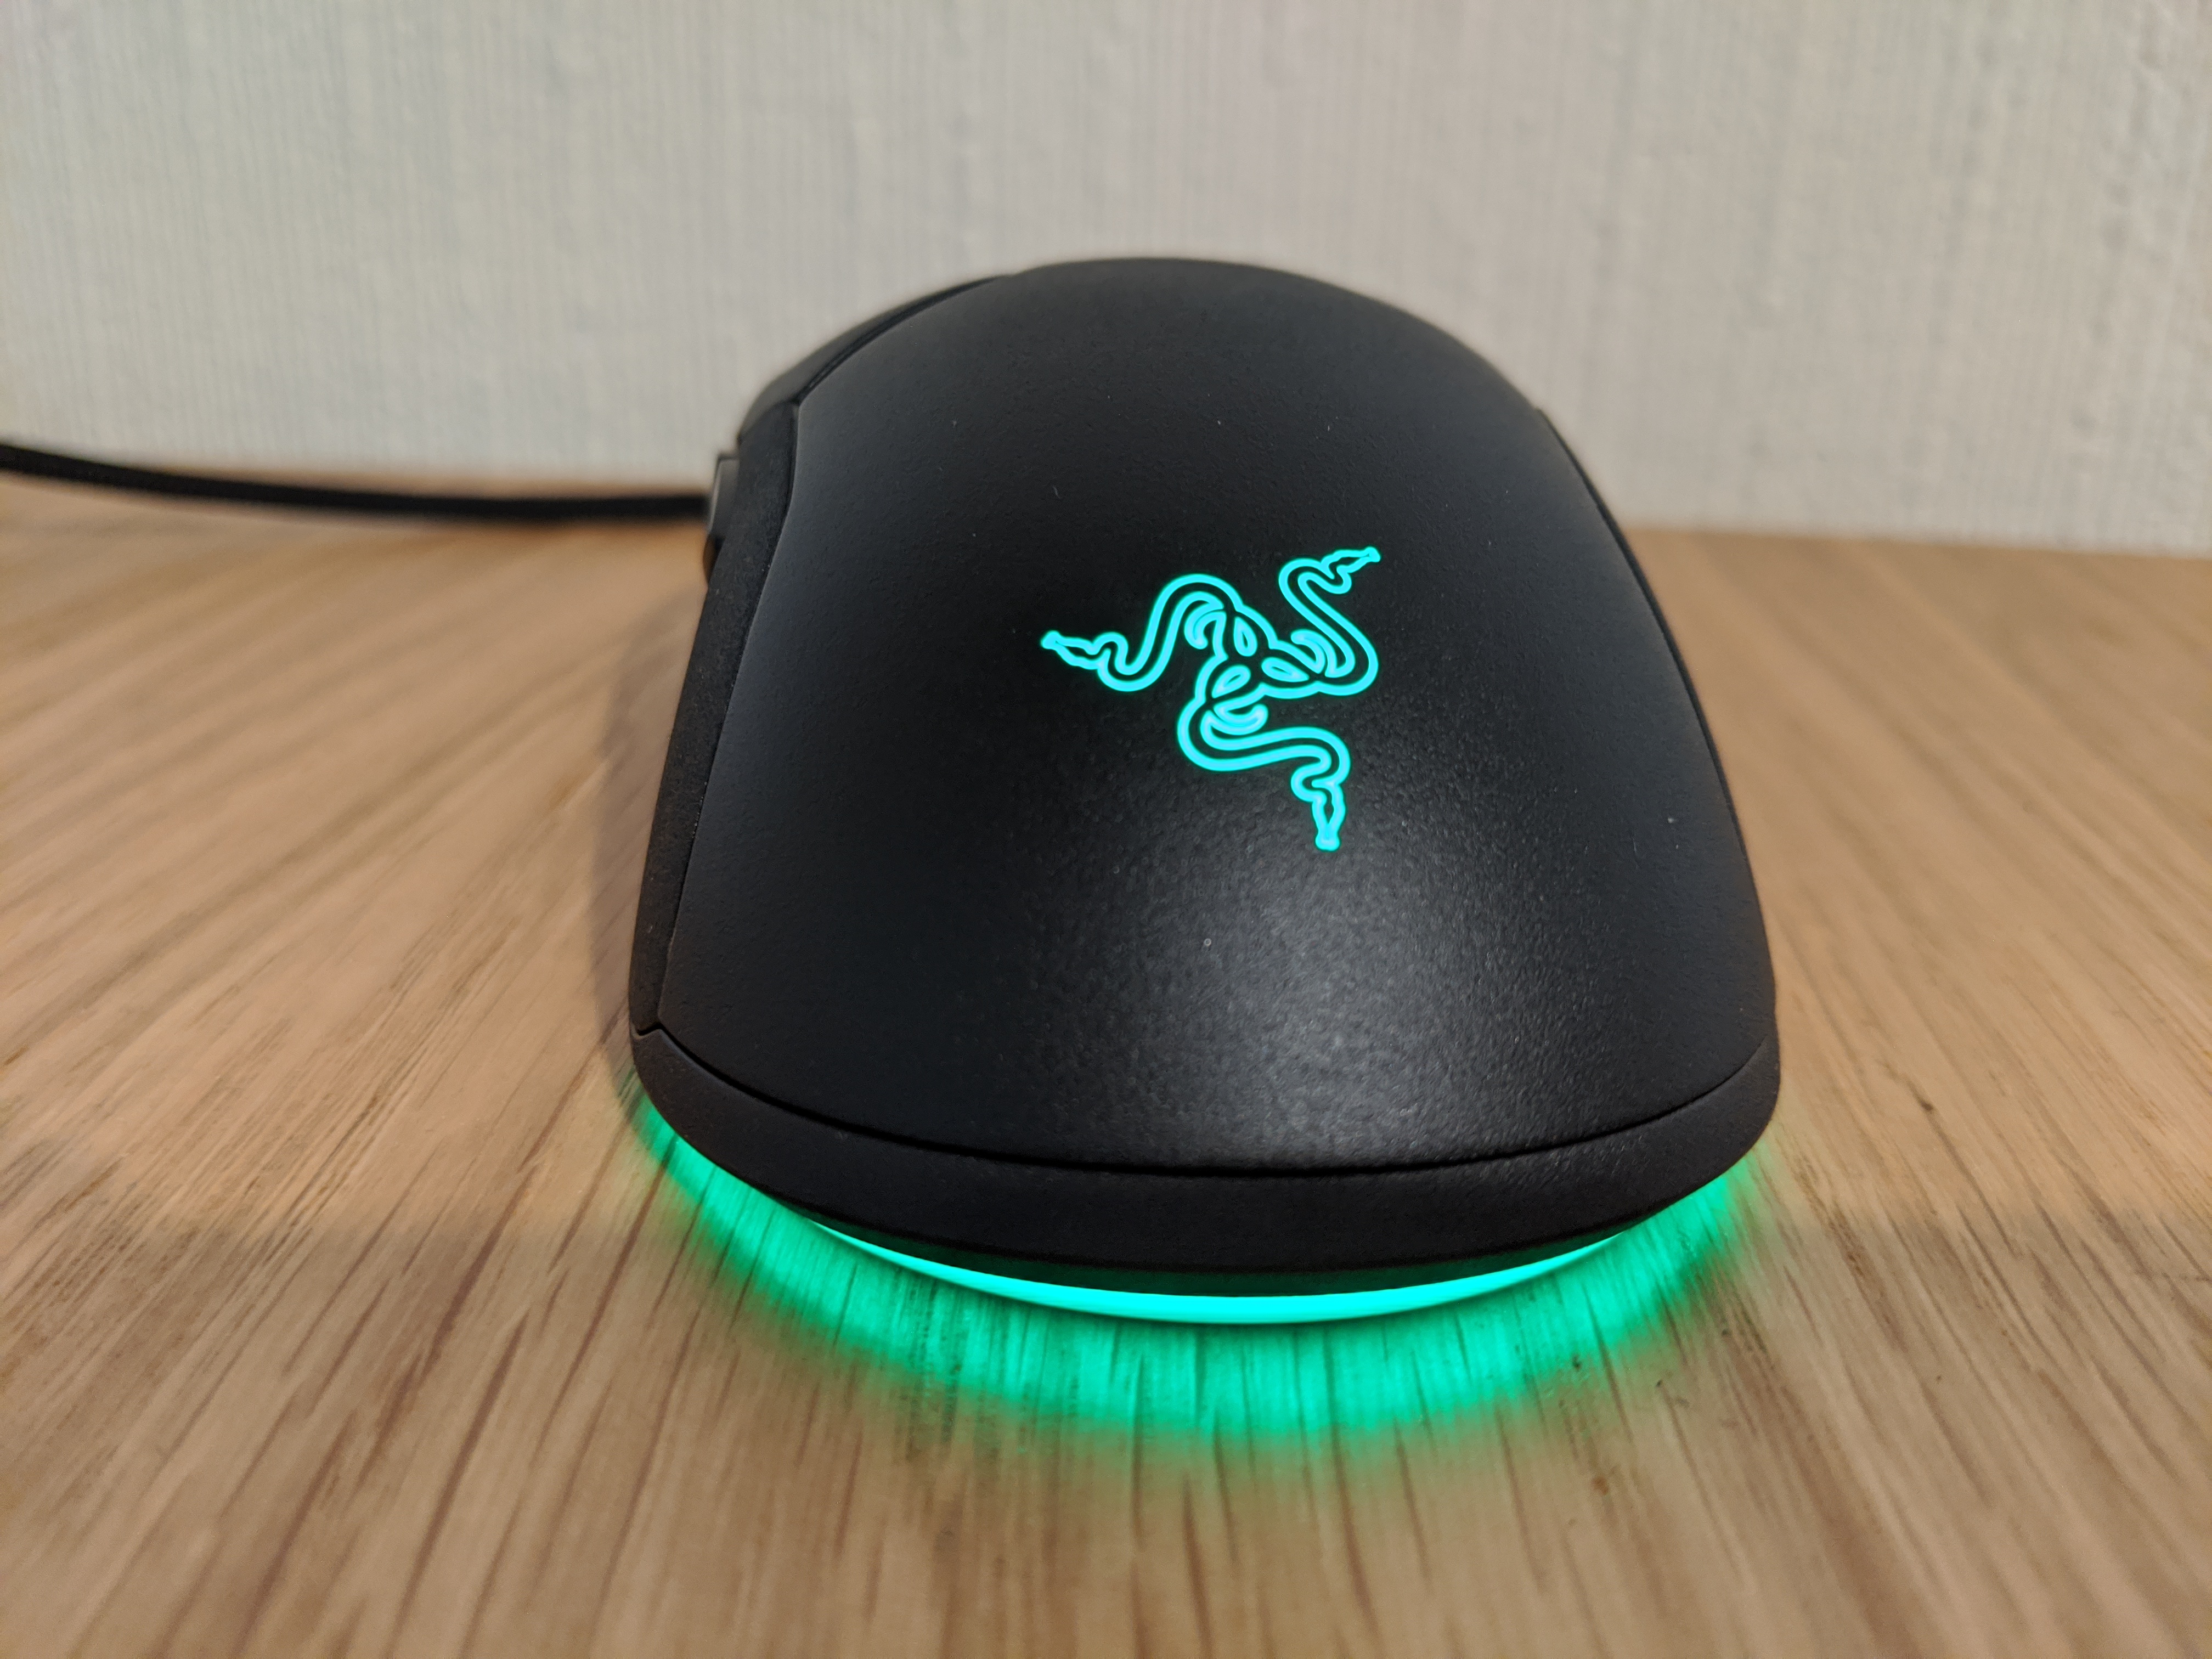 Razer Viper Mini Gaming Mouse Review Small But Feisty Tom S Hardware